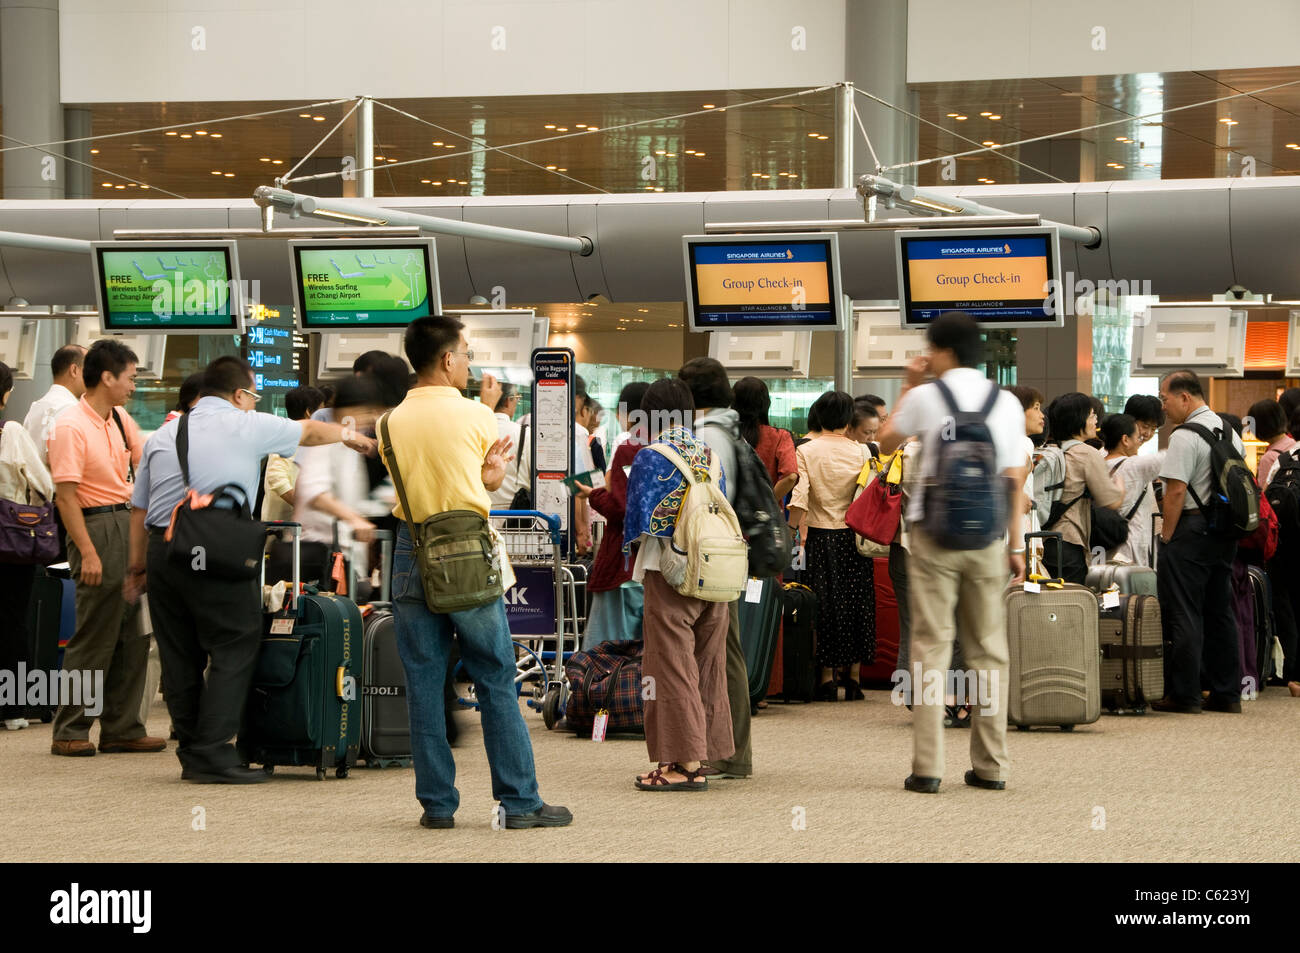 Singapore Airlines Group Check-in Schalter, Abflughalle im Terminal 3 des  Changi Airport, Singapore Stockfotografie - Alamy